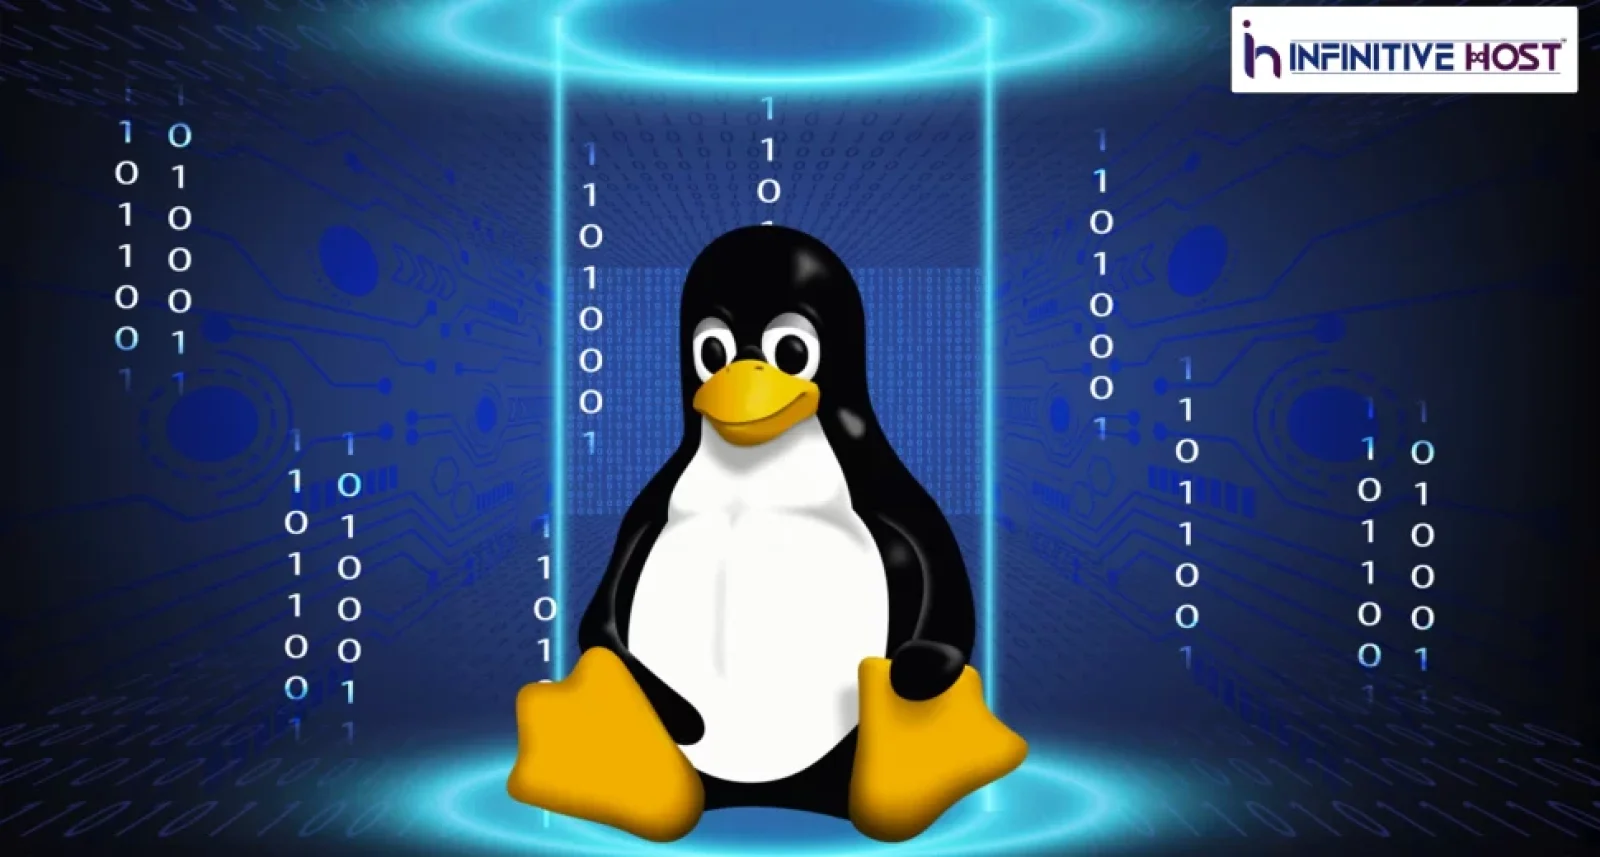 What Is The Inode Number In Linux?